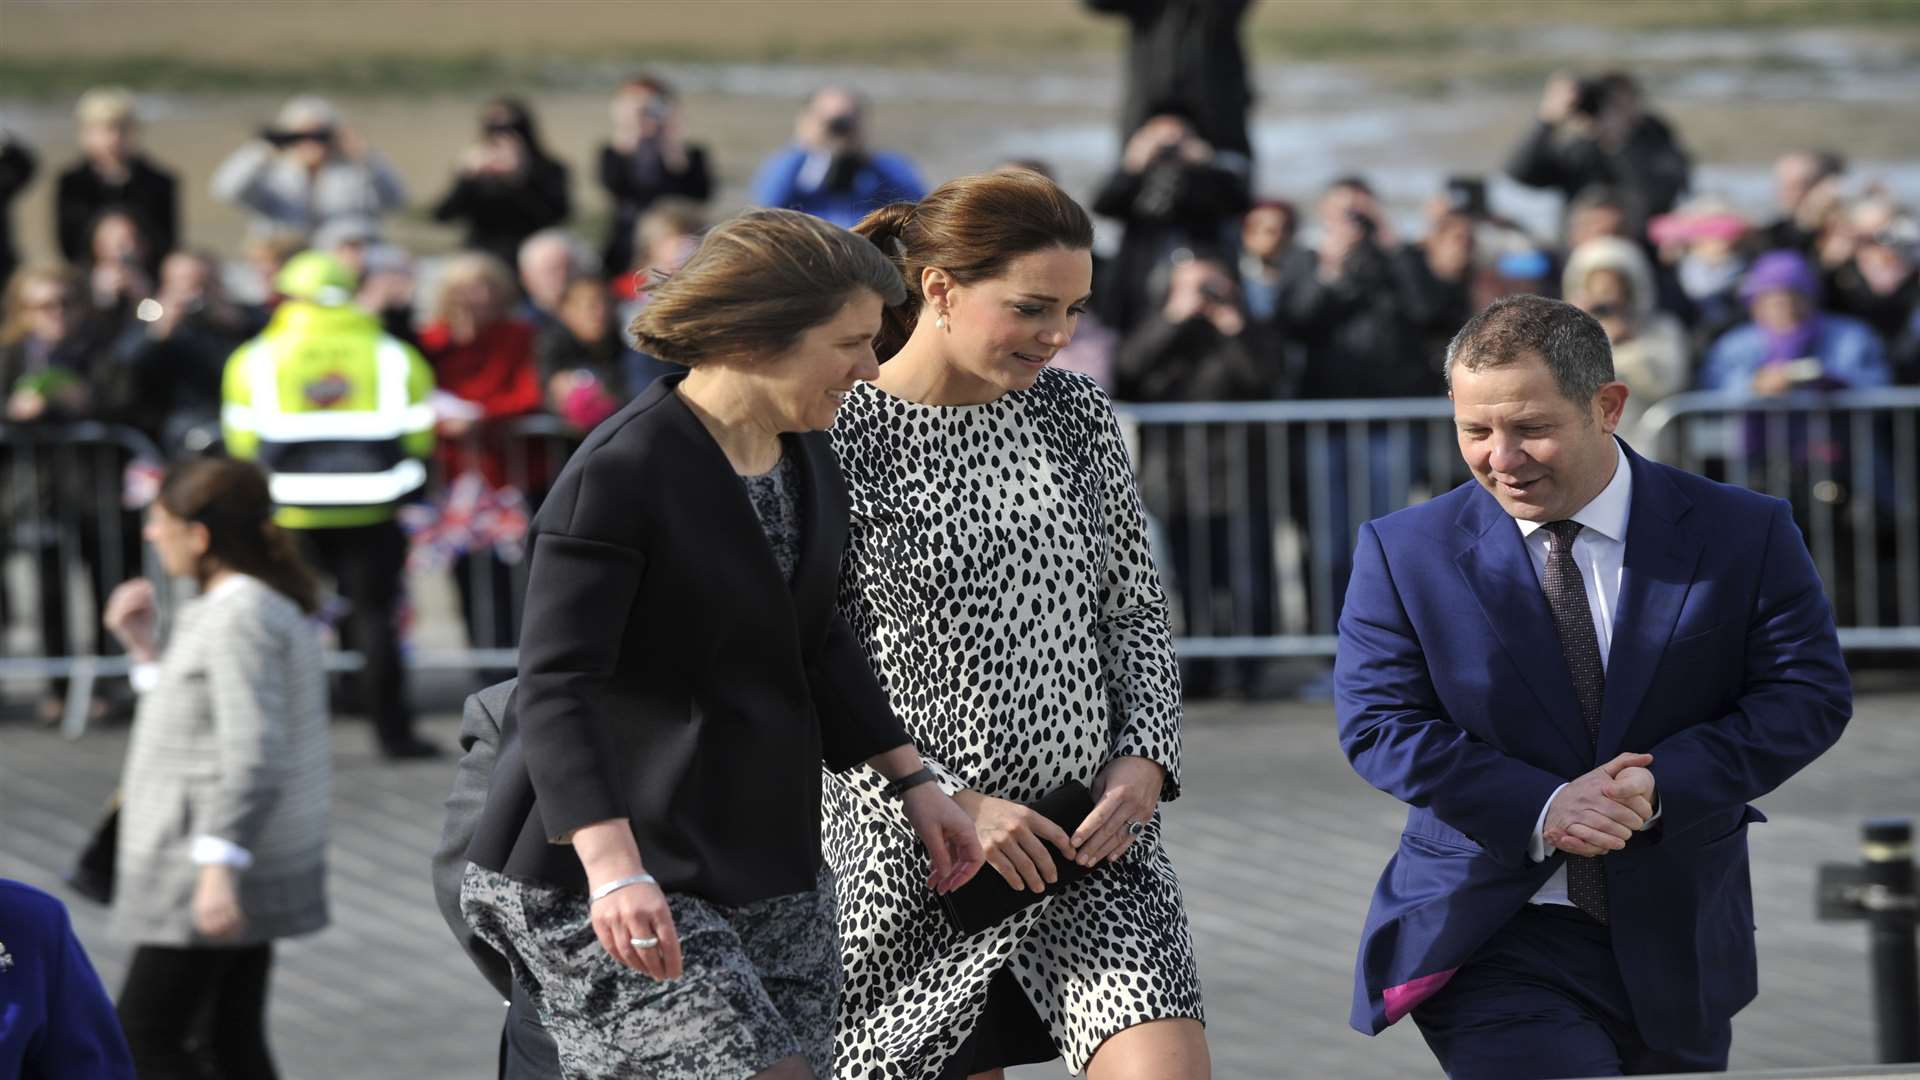 Kate's visit to the Turner Contemporary at Margate was one of her last public engagements before the arrival of her daughter